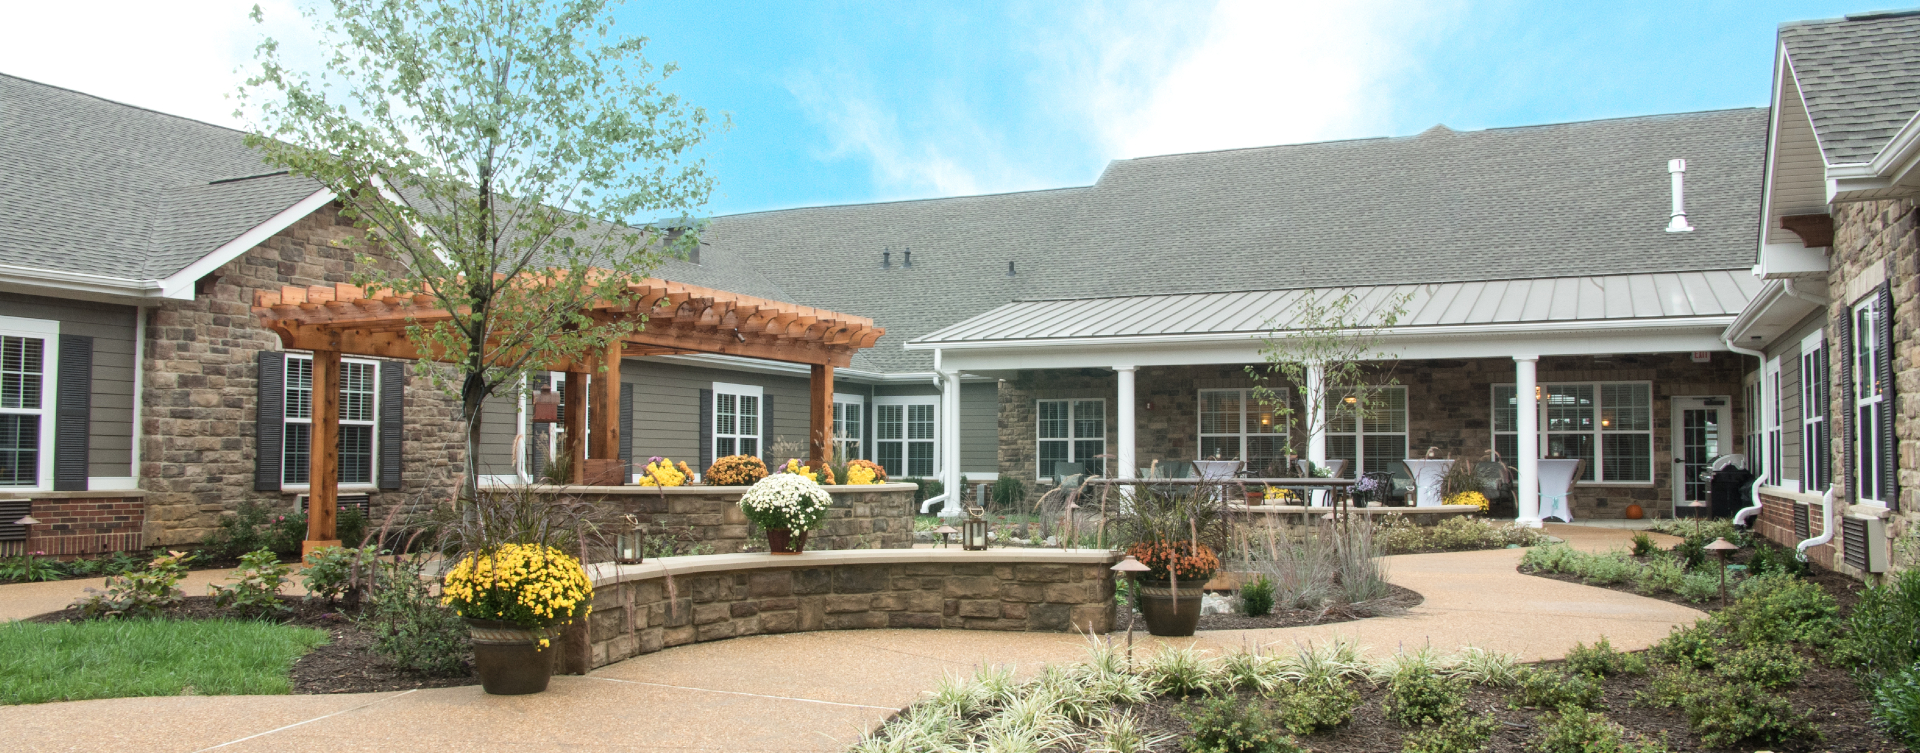 Enjoy bird watching, gardening and barbecuing in our courtyard at Bickford of Spotsylvania